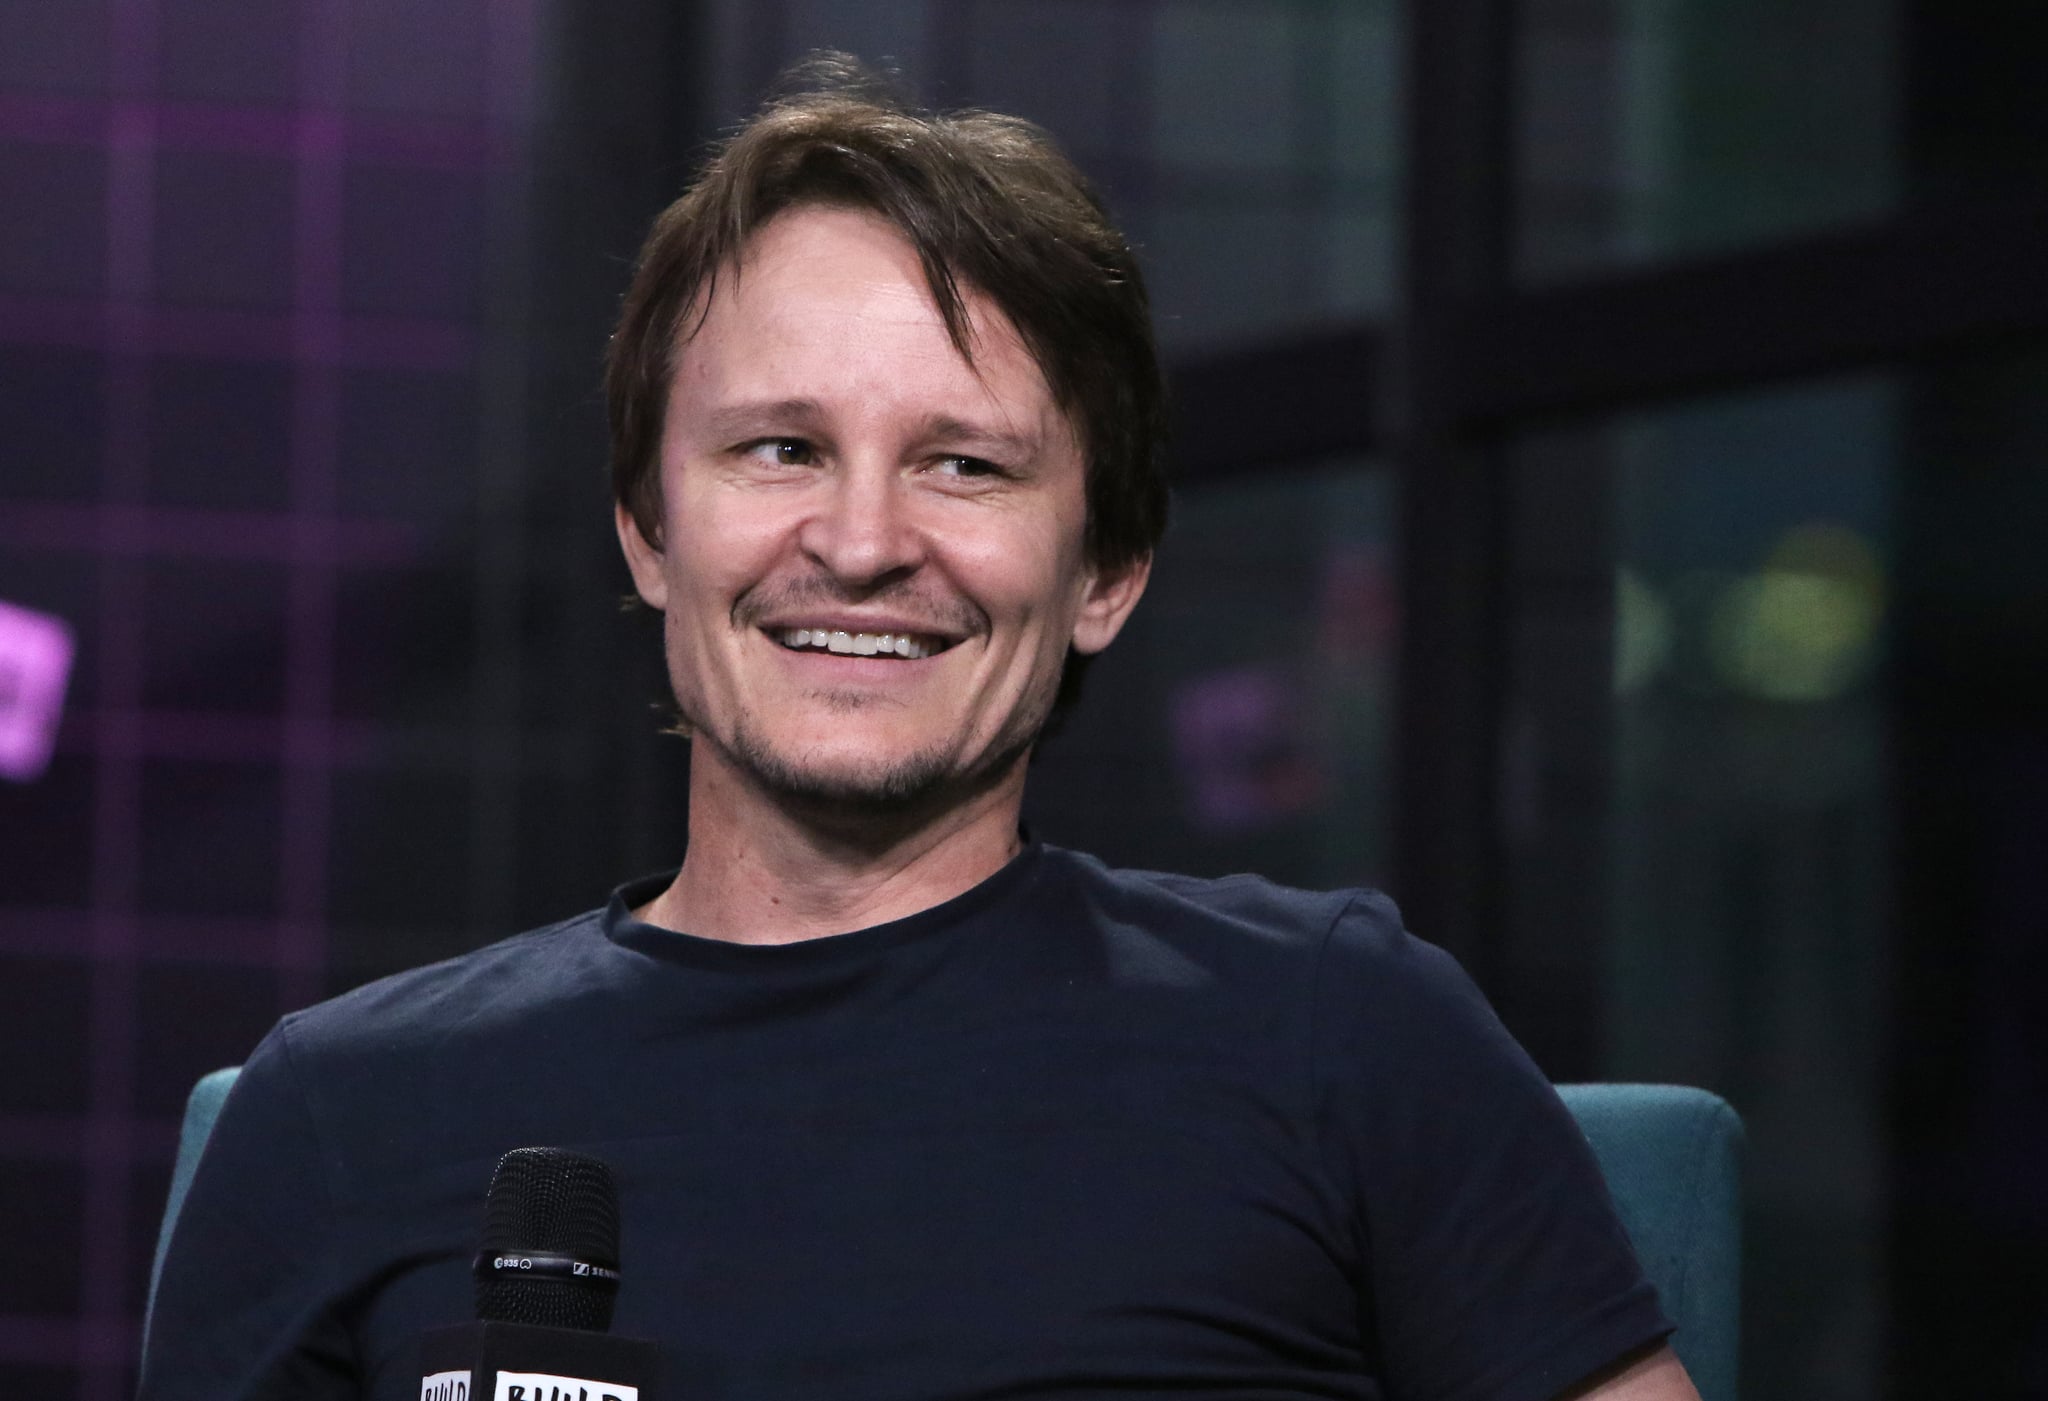 NEW YORK, NEW YORK - JULY 31: Actor Damon Herriman attends the Build Series to discuss